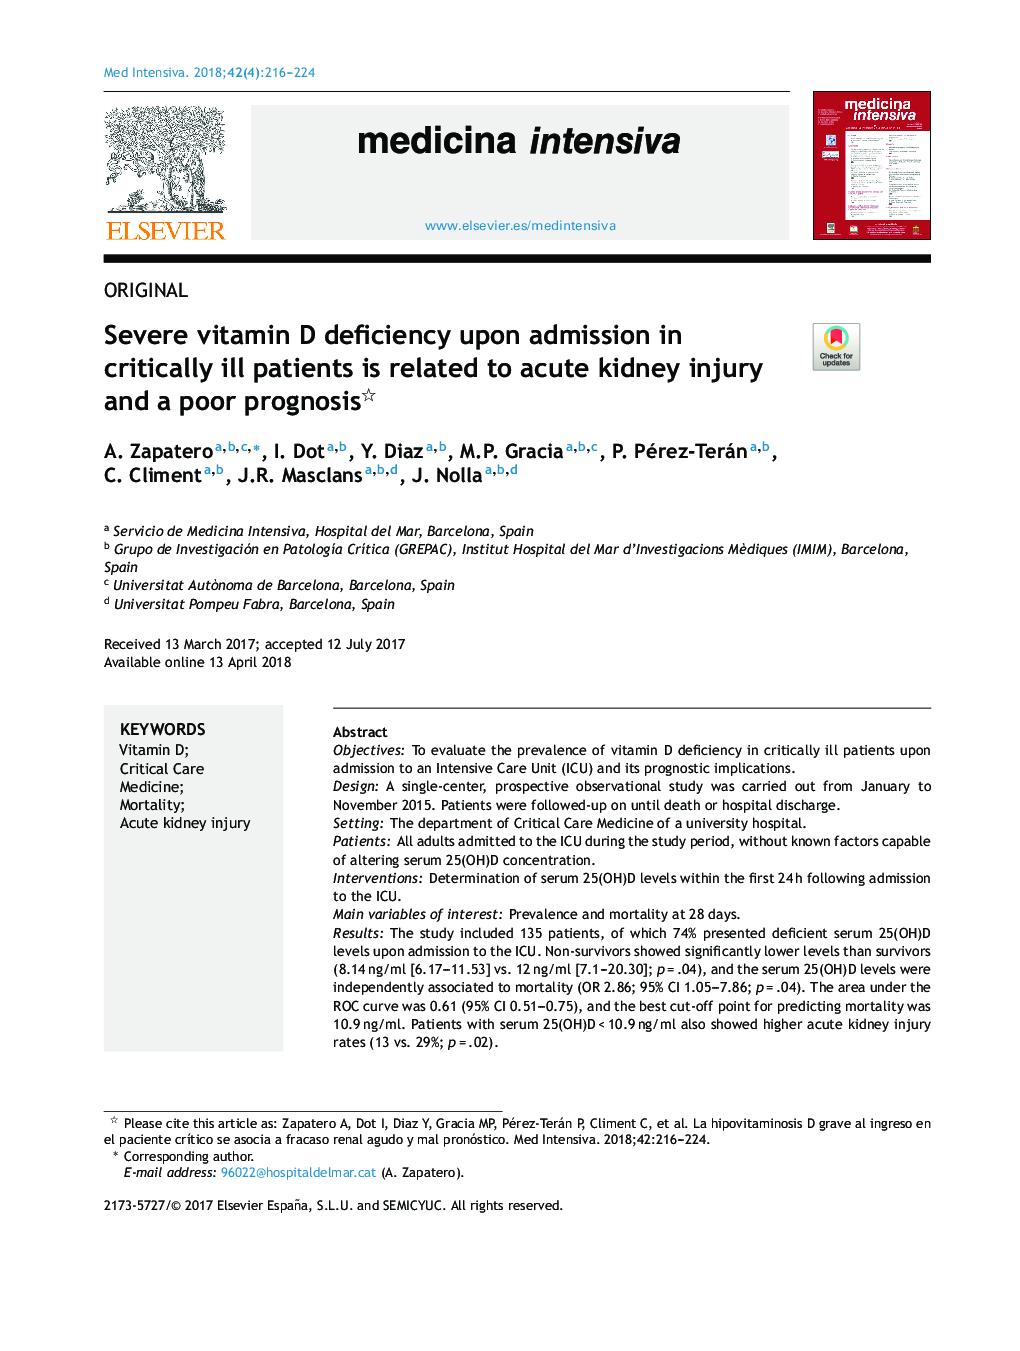 Severe vitamin D deficiency upon admission in critically ill patients is related to acute kidney injury and a poor prognosis